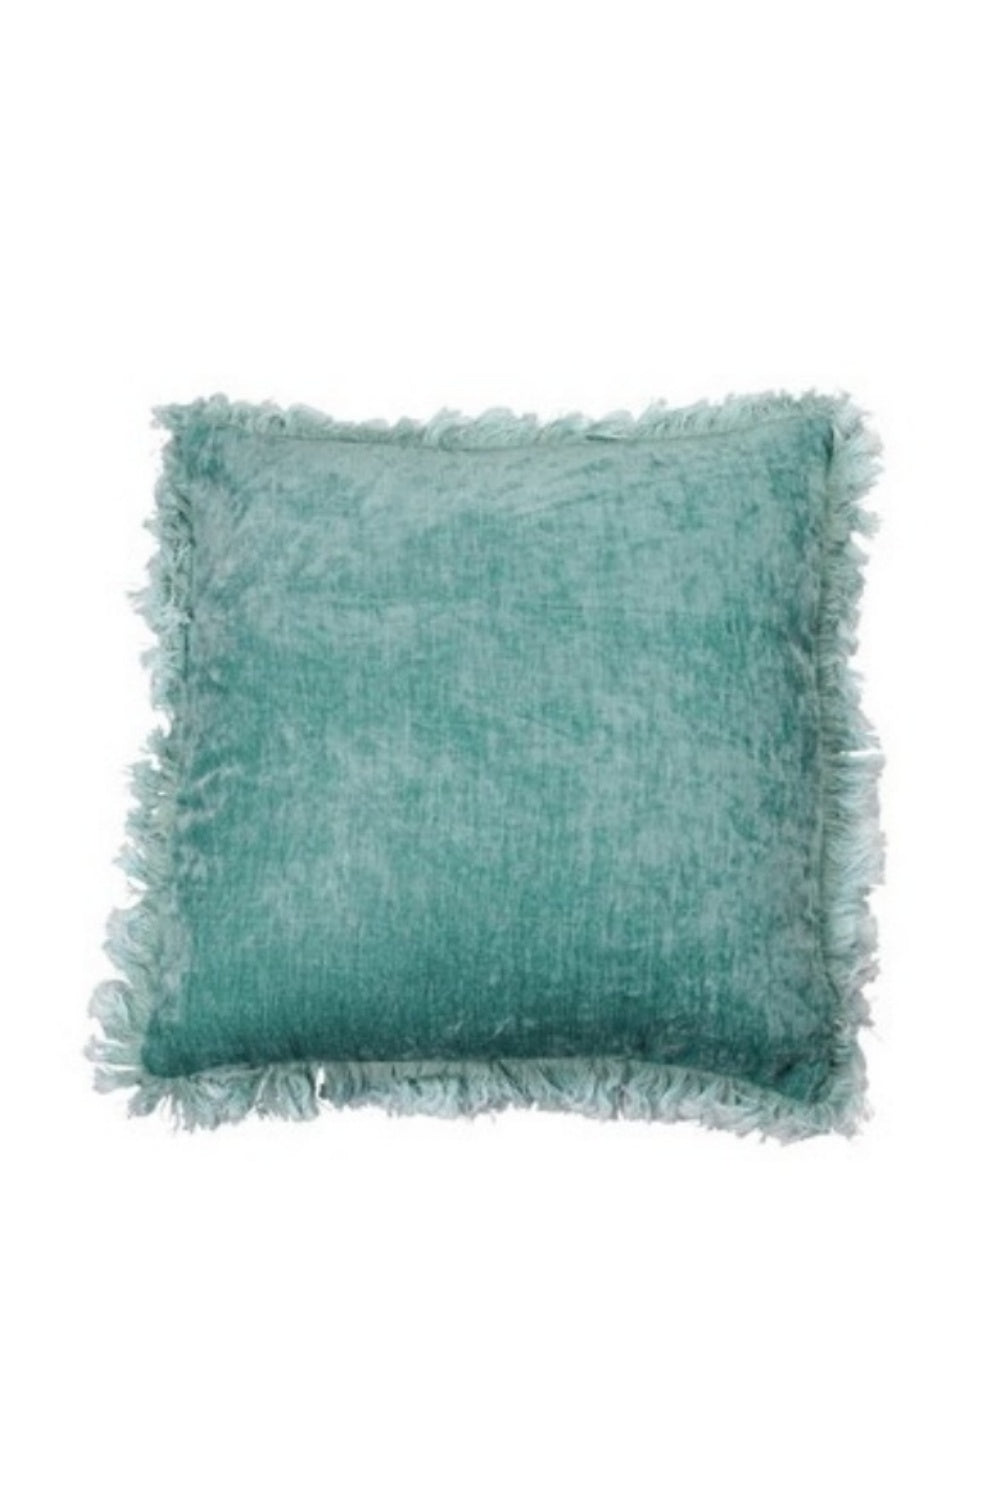 ORCA WASHED FRILL CUSHION SPEARMINT